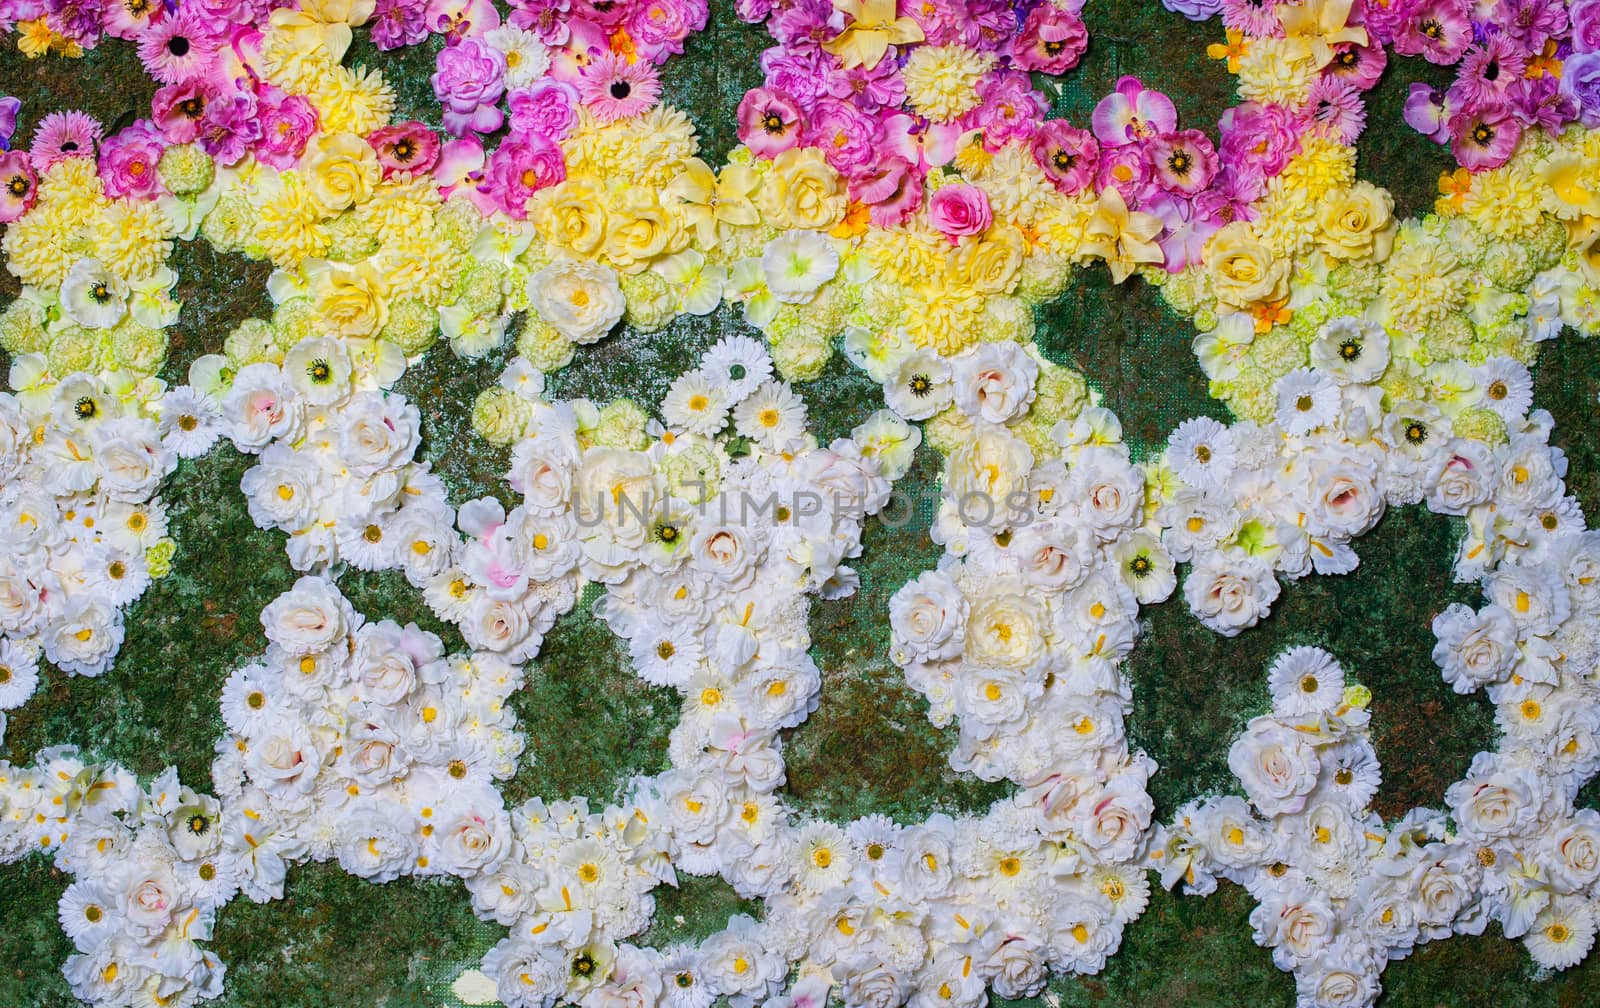 texture on a flowerbed of colorful flowers in the Park.